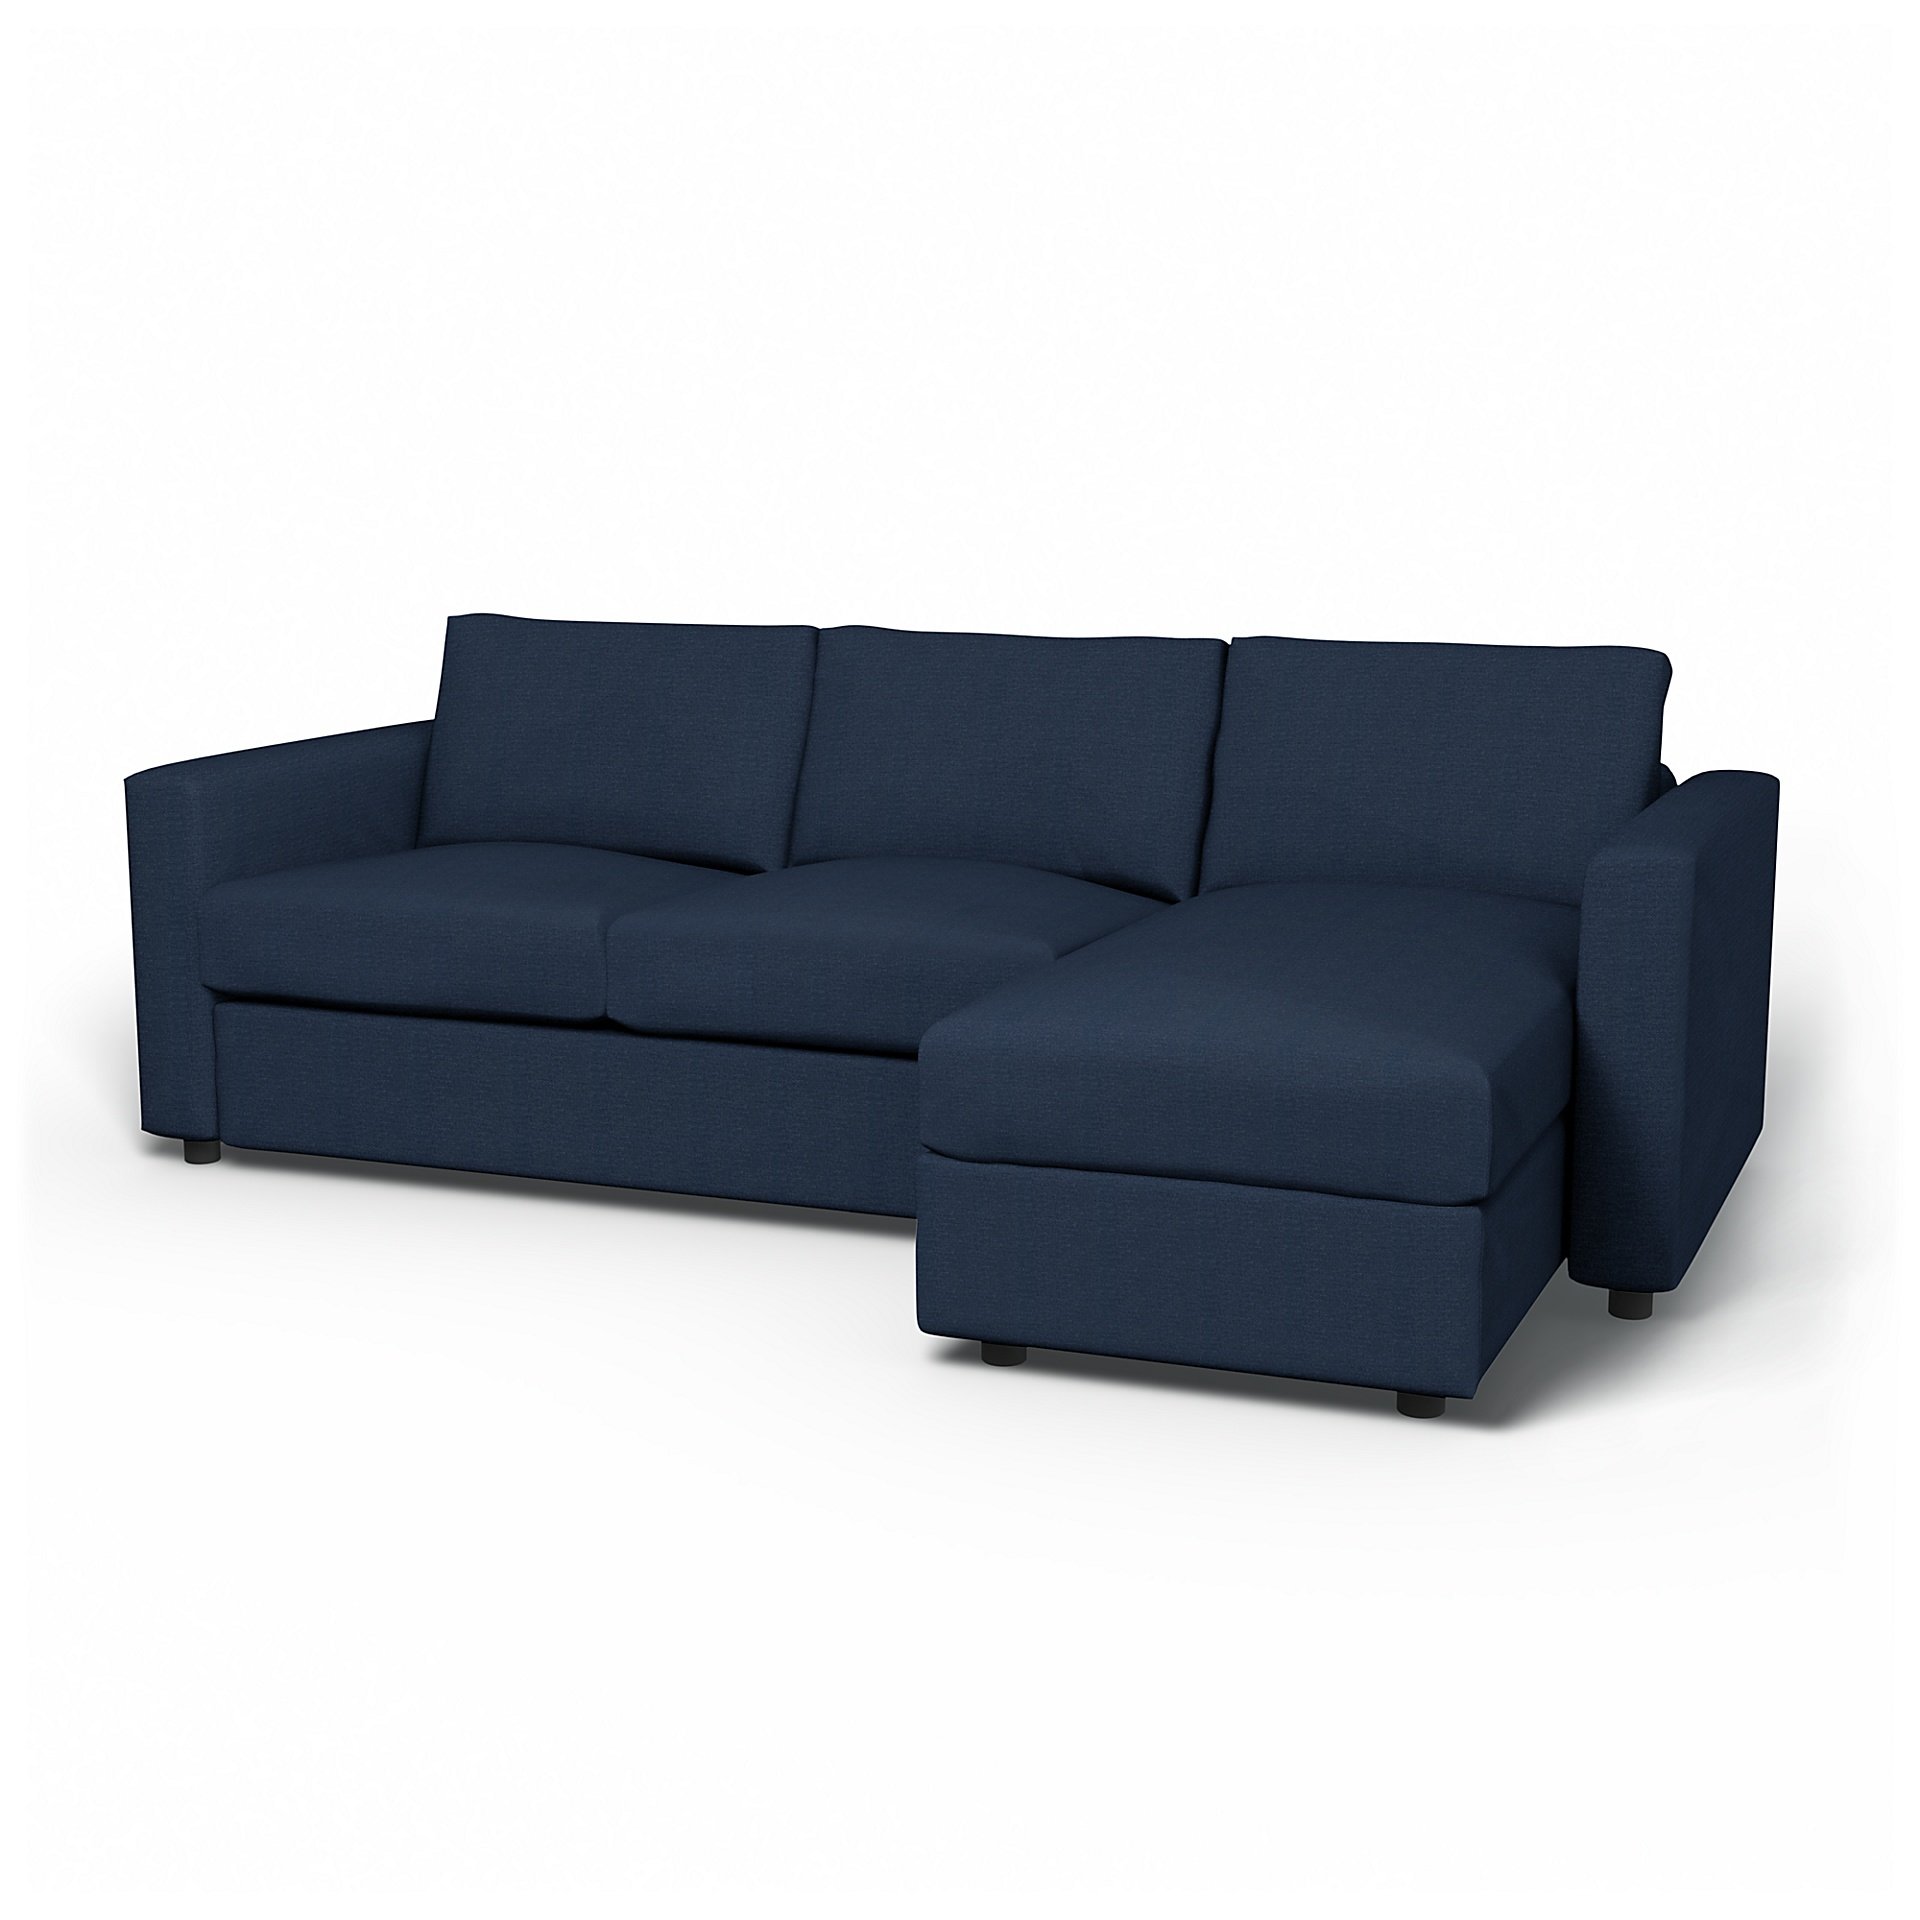 IKEA - Vimle 2 Seater Sofa with Chaise Cover, Navy Blue, Linen - Bemz